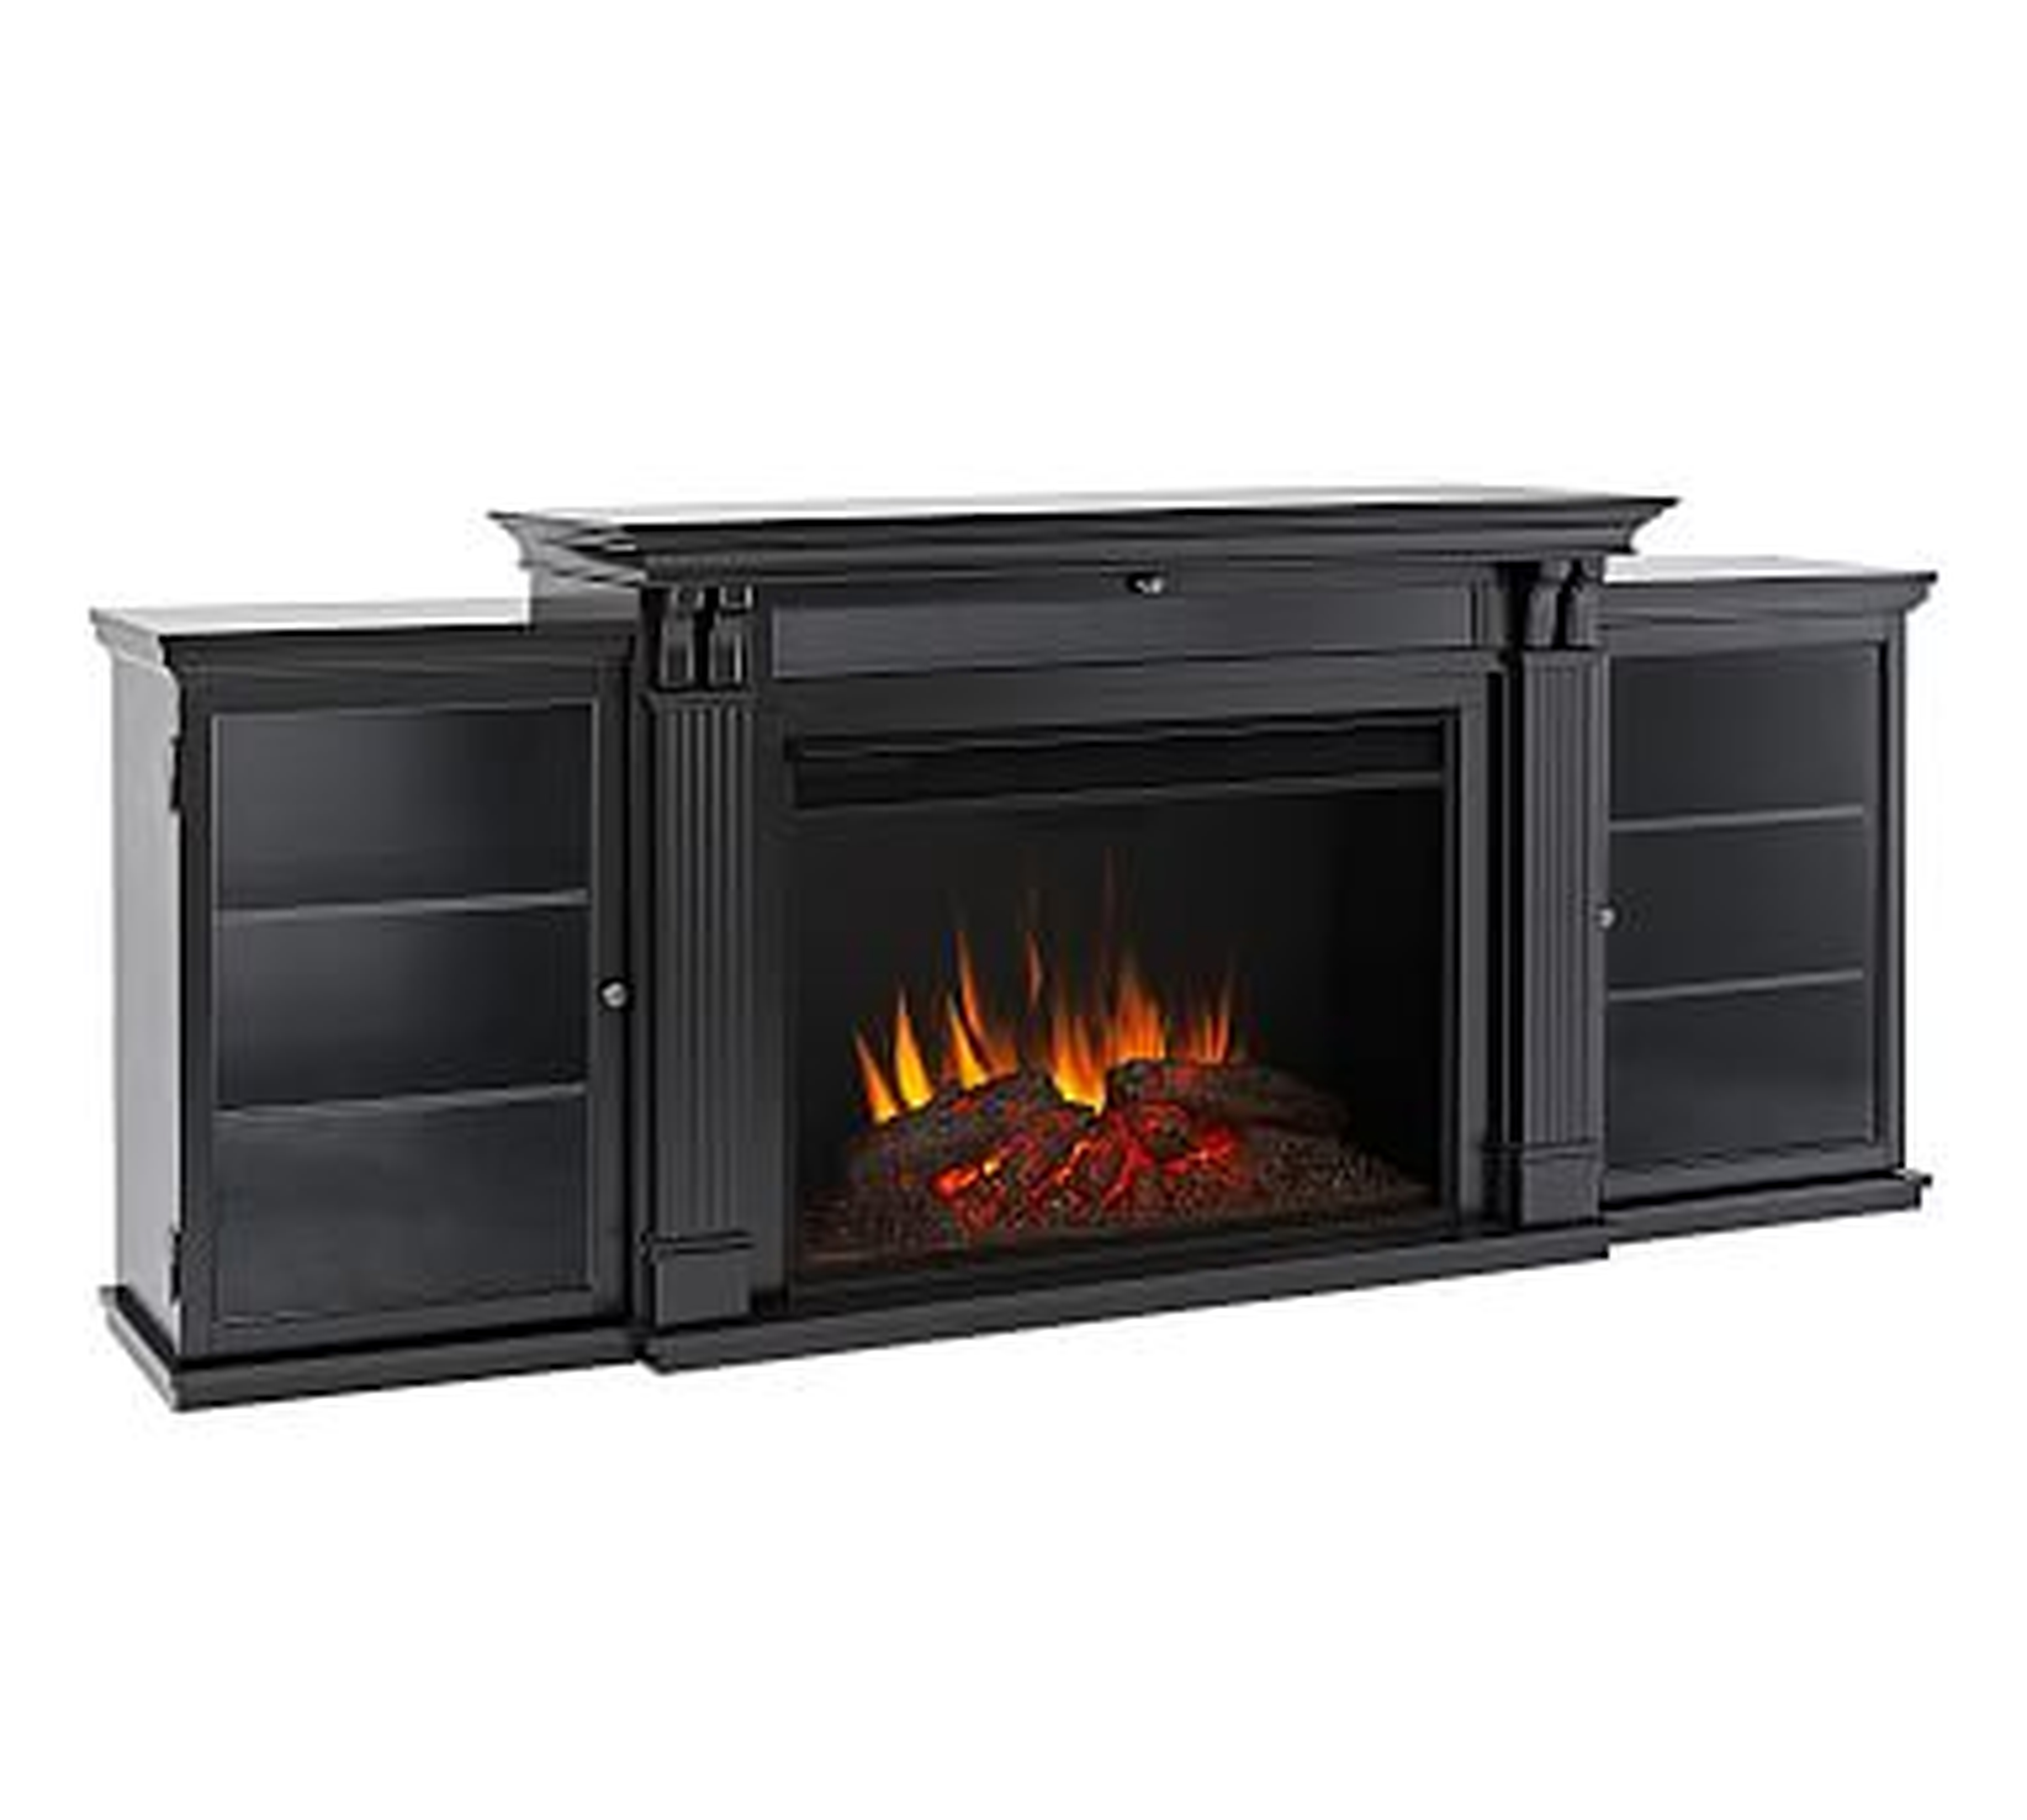 Real Flame(R) Tracey Grand Electric Fireplace Media Cabinet, Black - Pottery Barn